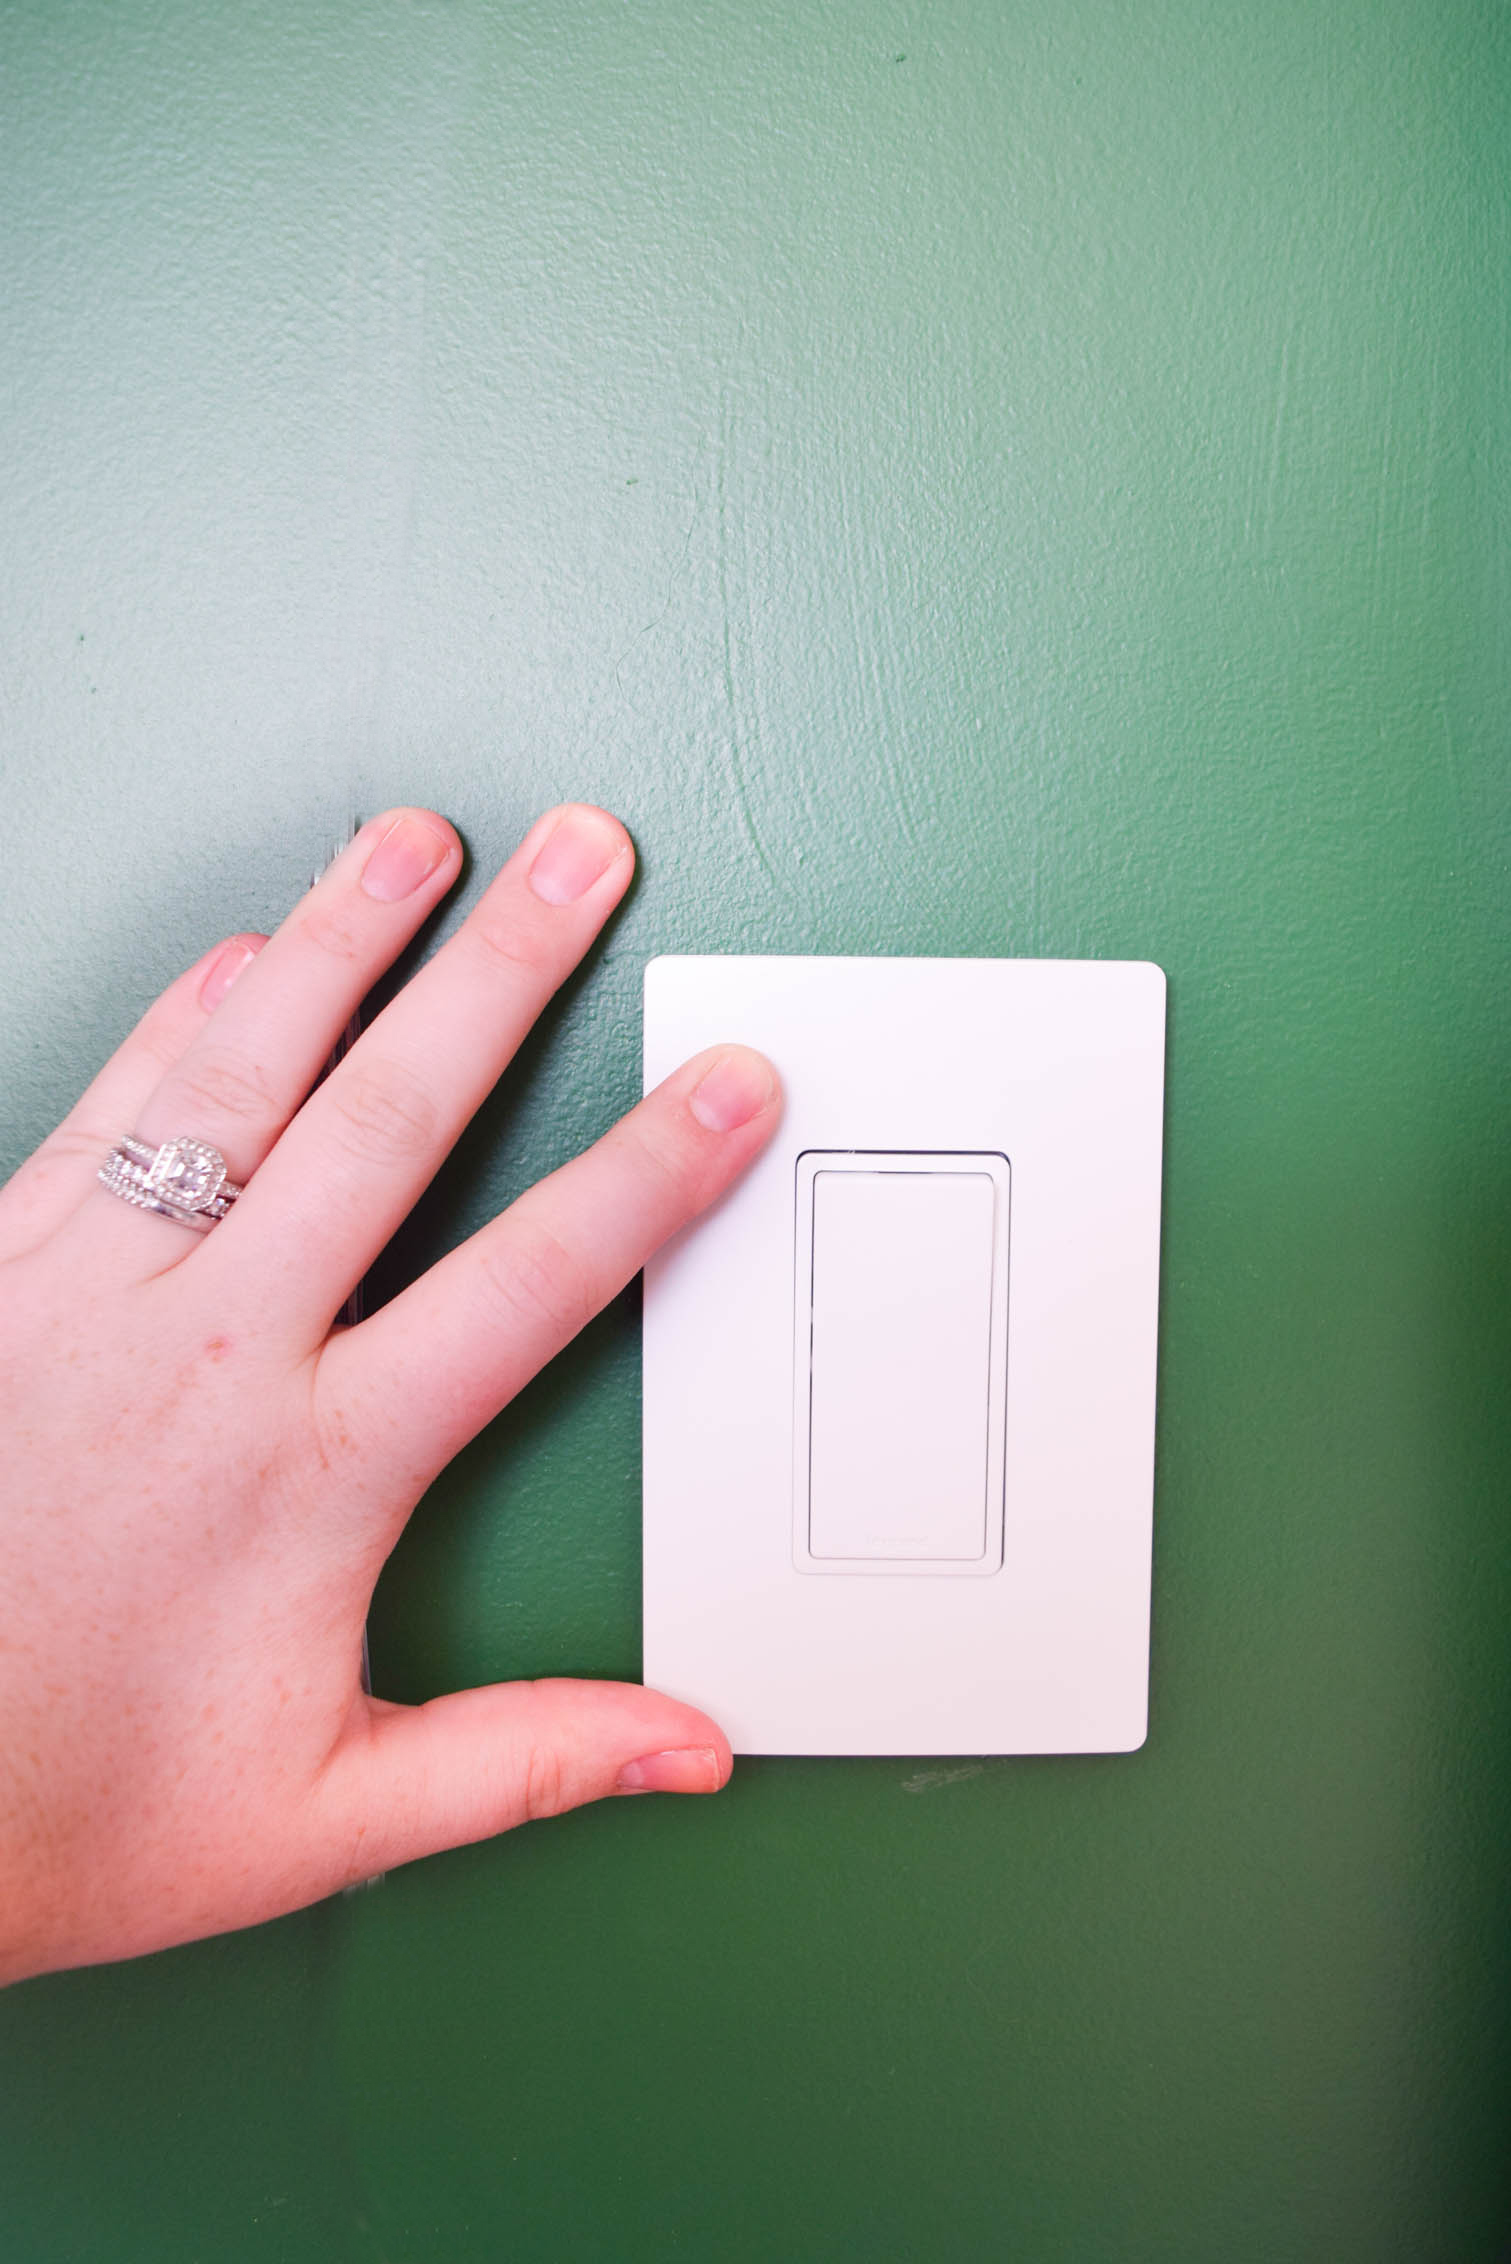 Swapping light switches is easy AF y'all. Who knew?! Legrand did, which is why they made these beautiful switches that are easy to install. Come catch the deets on the blog, as well as a sneak peak of our eclectic guest room reveal.